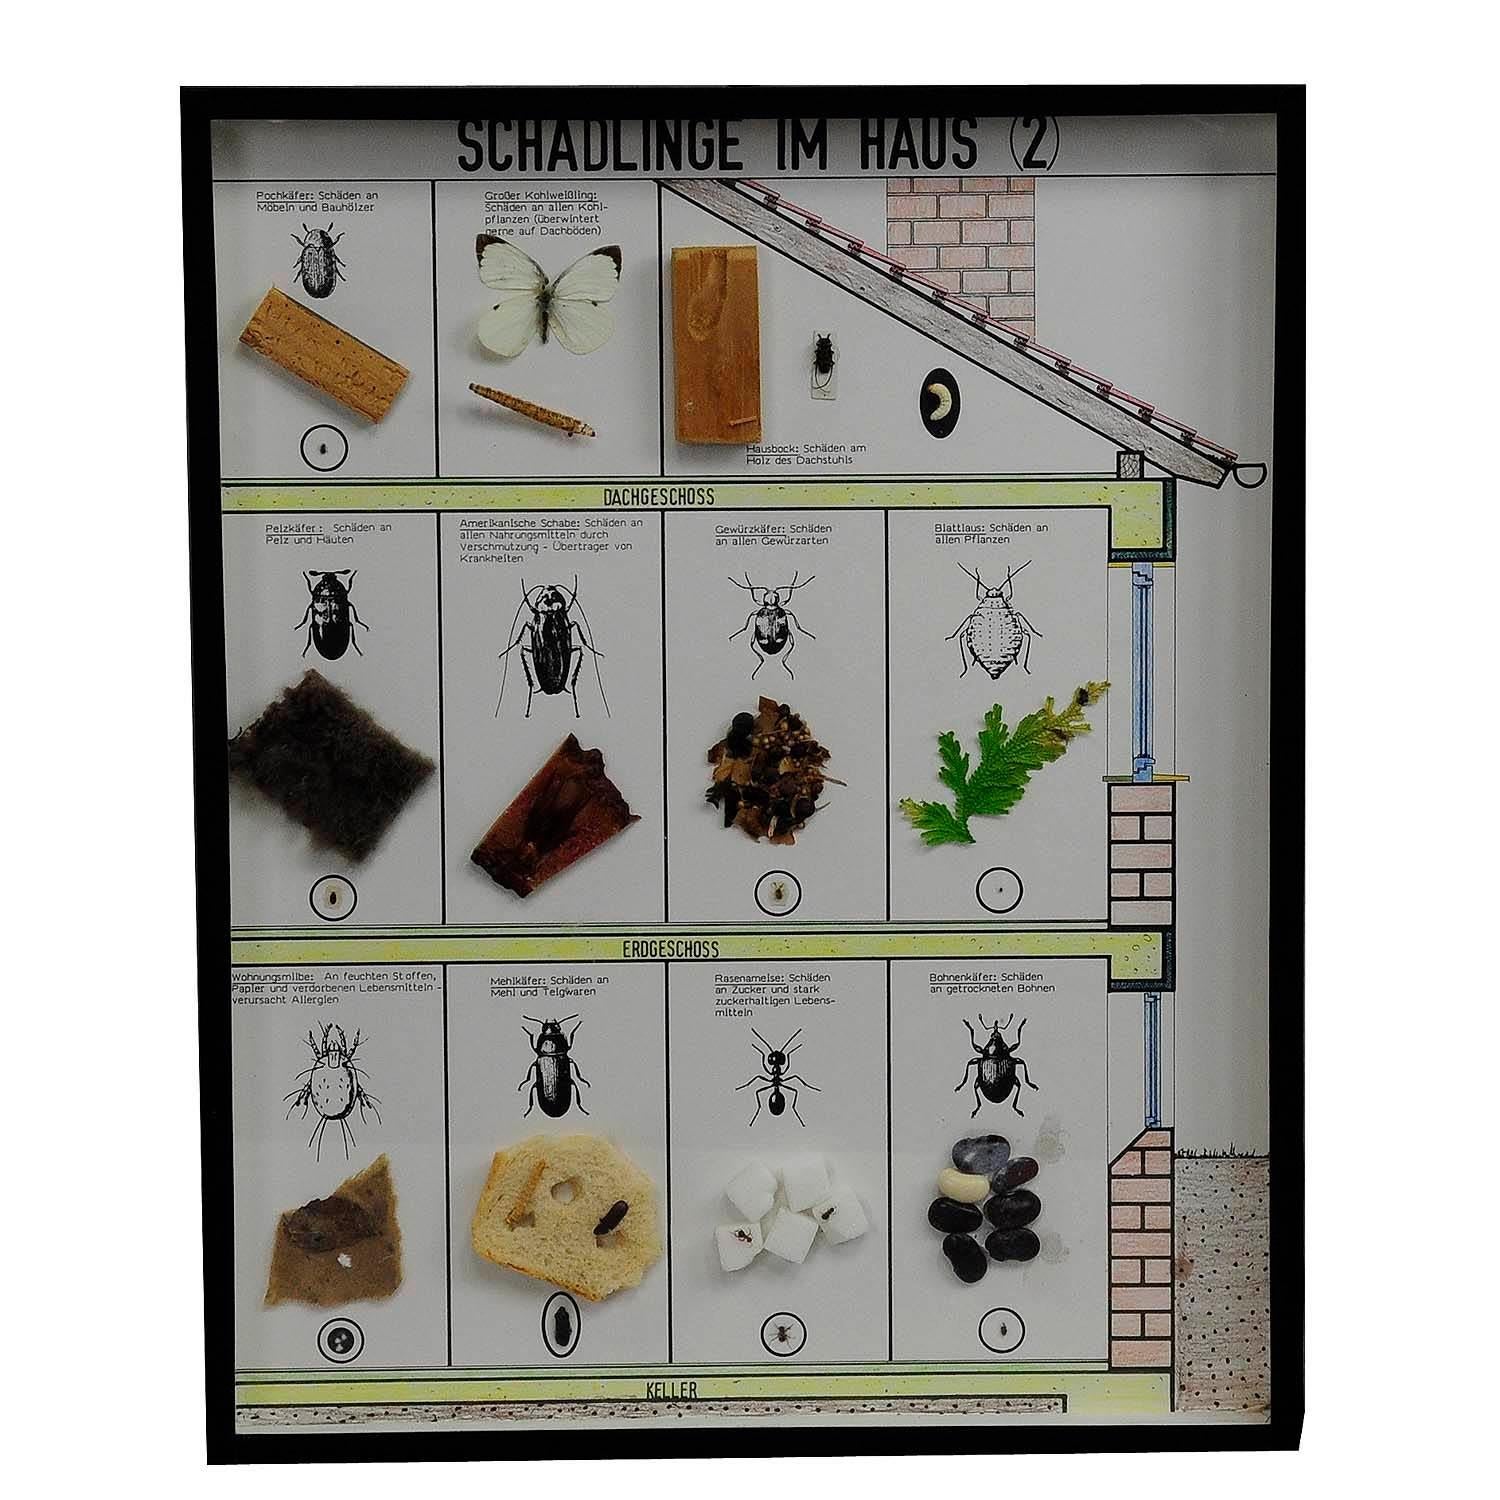 Great Vintage School Teaching Display of Household pests

A vintage school teaching showcase with household pests specimen behind glass. Used as teaching material in German schools ca. 1960.

artfour is an owner-managed trading company that sells